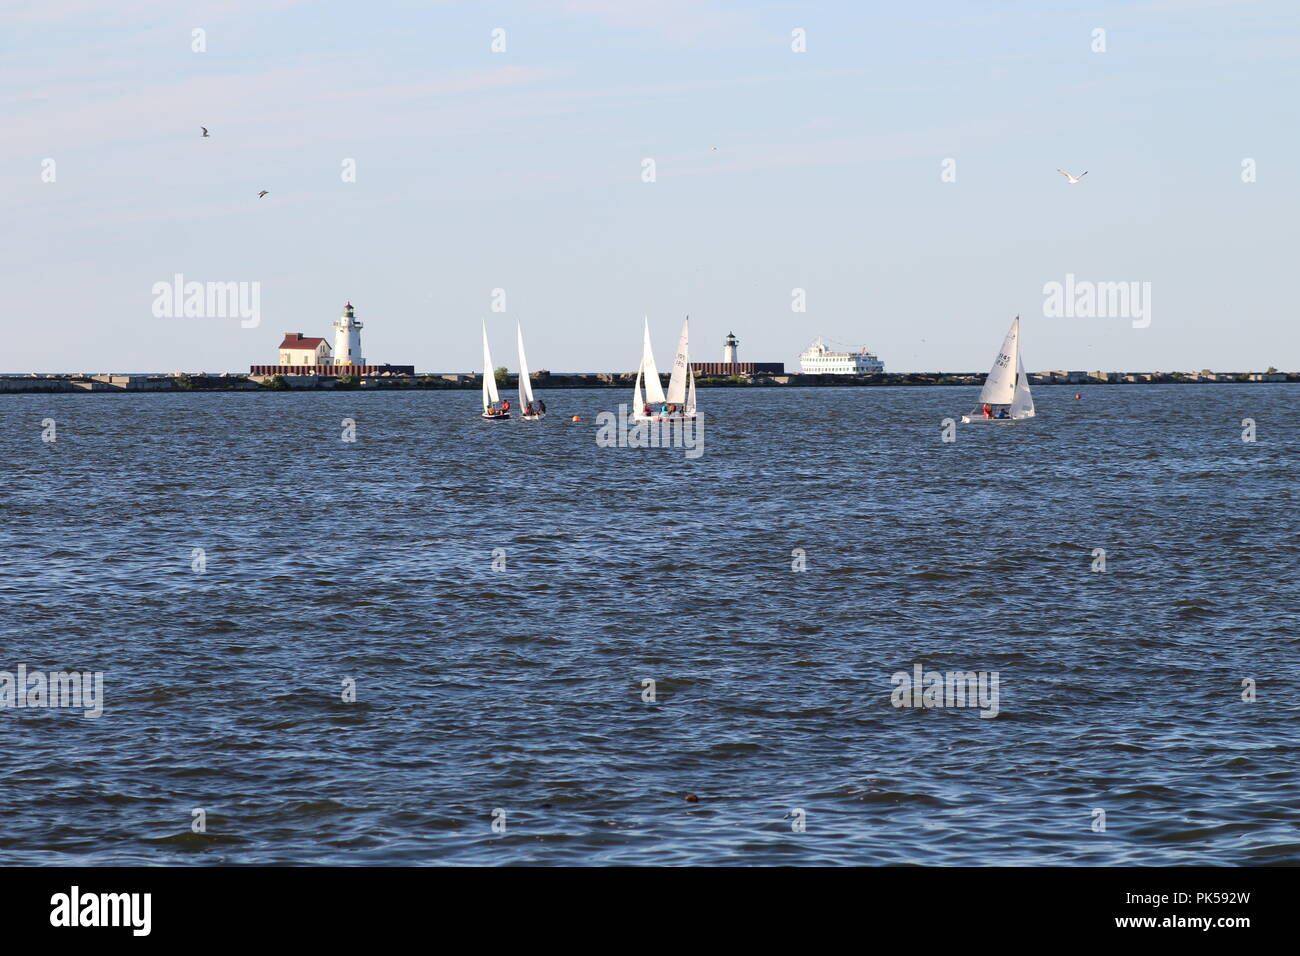 lighthouses out on a lake with sail boats and ship in the water Stock Photo